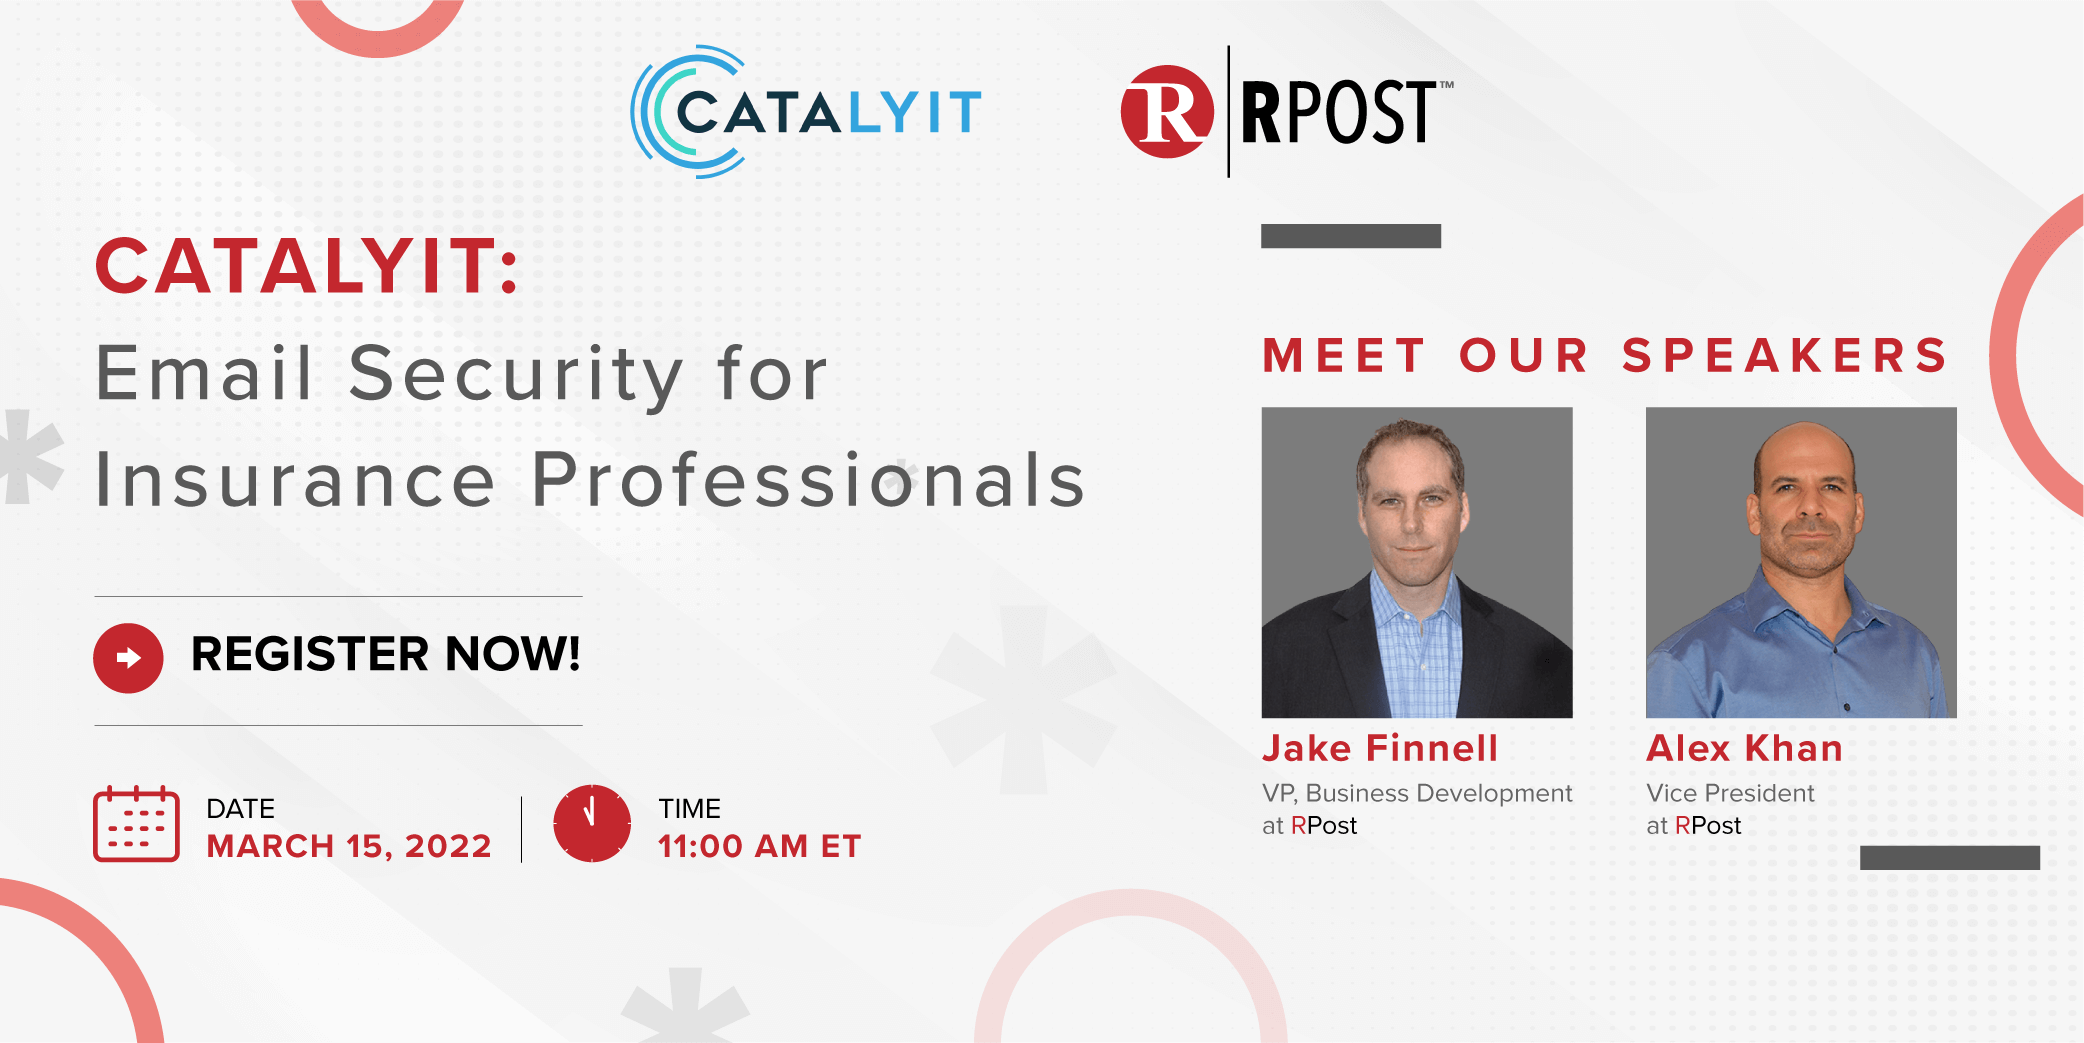 Catalyit: Email Security for Insurance Professionals